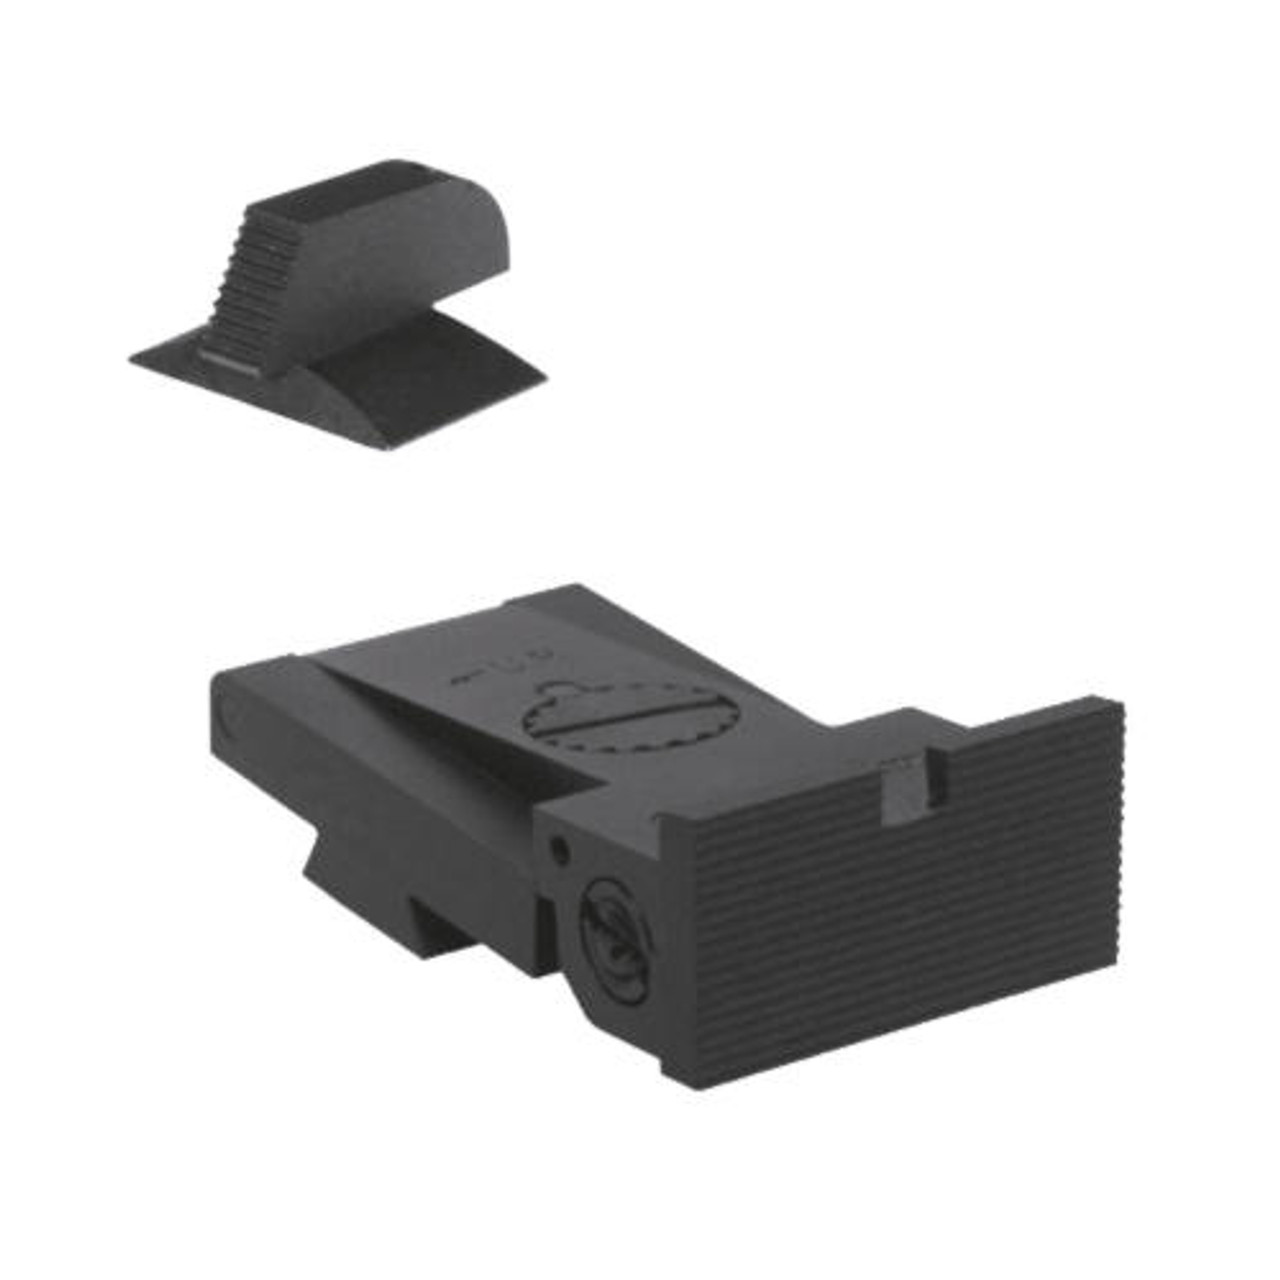 Kensight Kensight Target 1911 Sights Set with Square Blade - Serrated 0.200 Front Sights - Fits Bomar BMCS  Sight Dovetail Cut